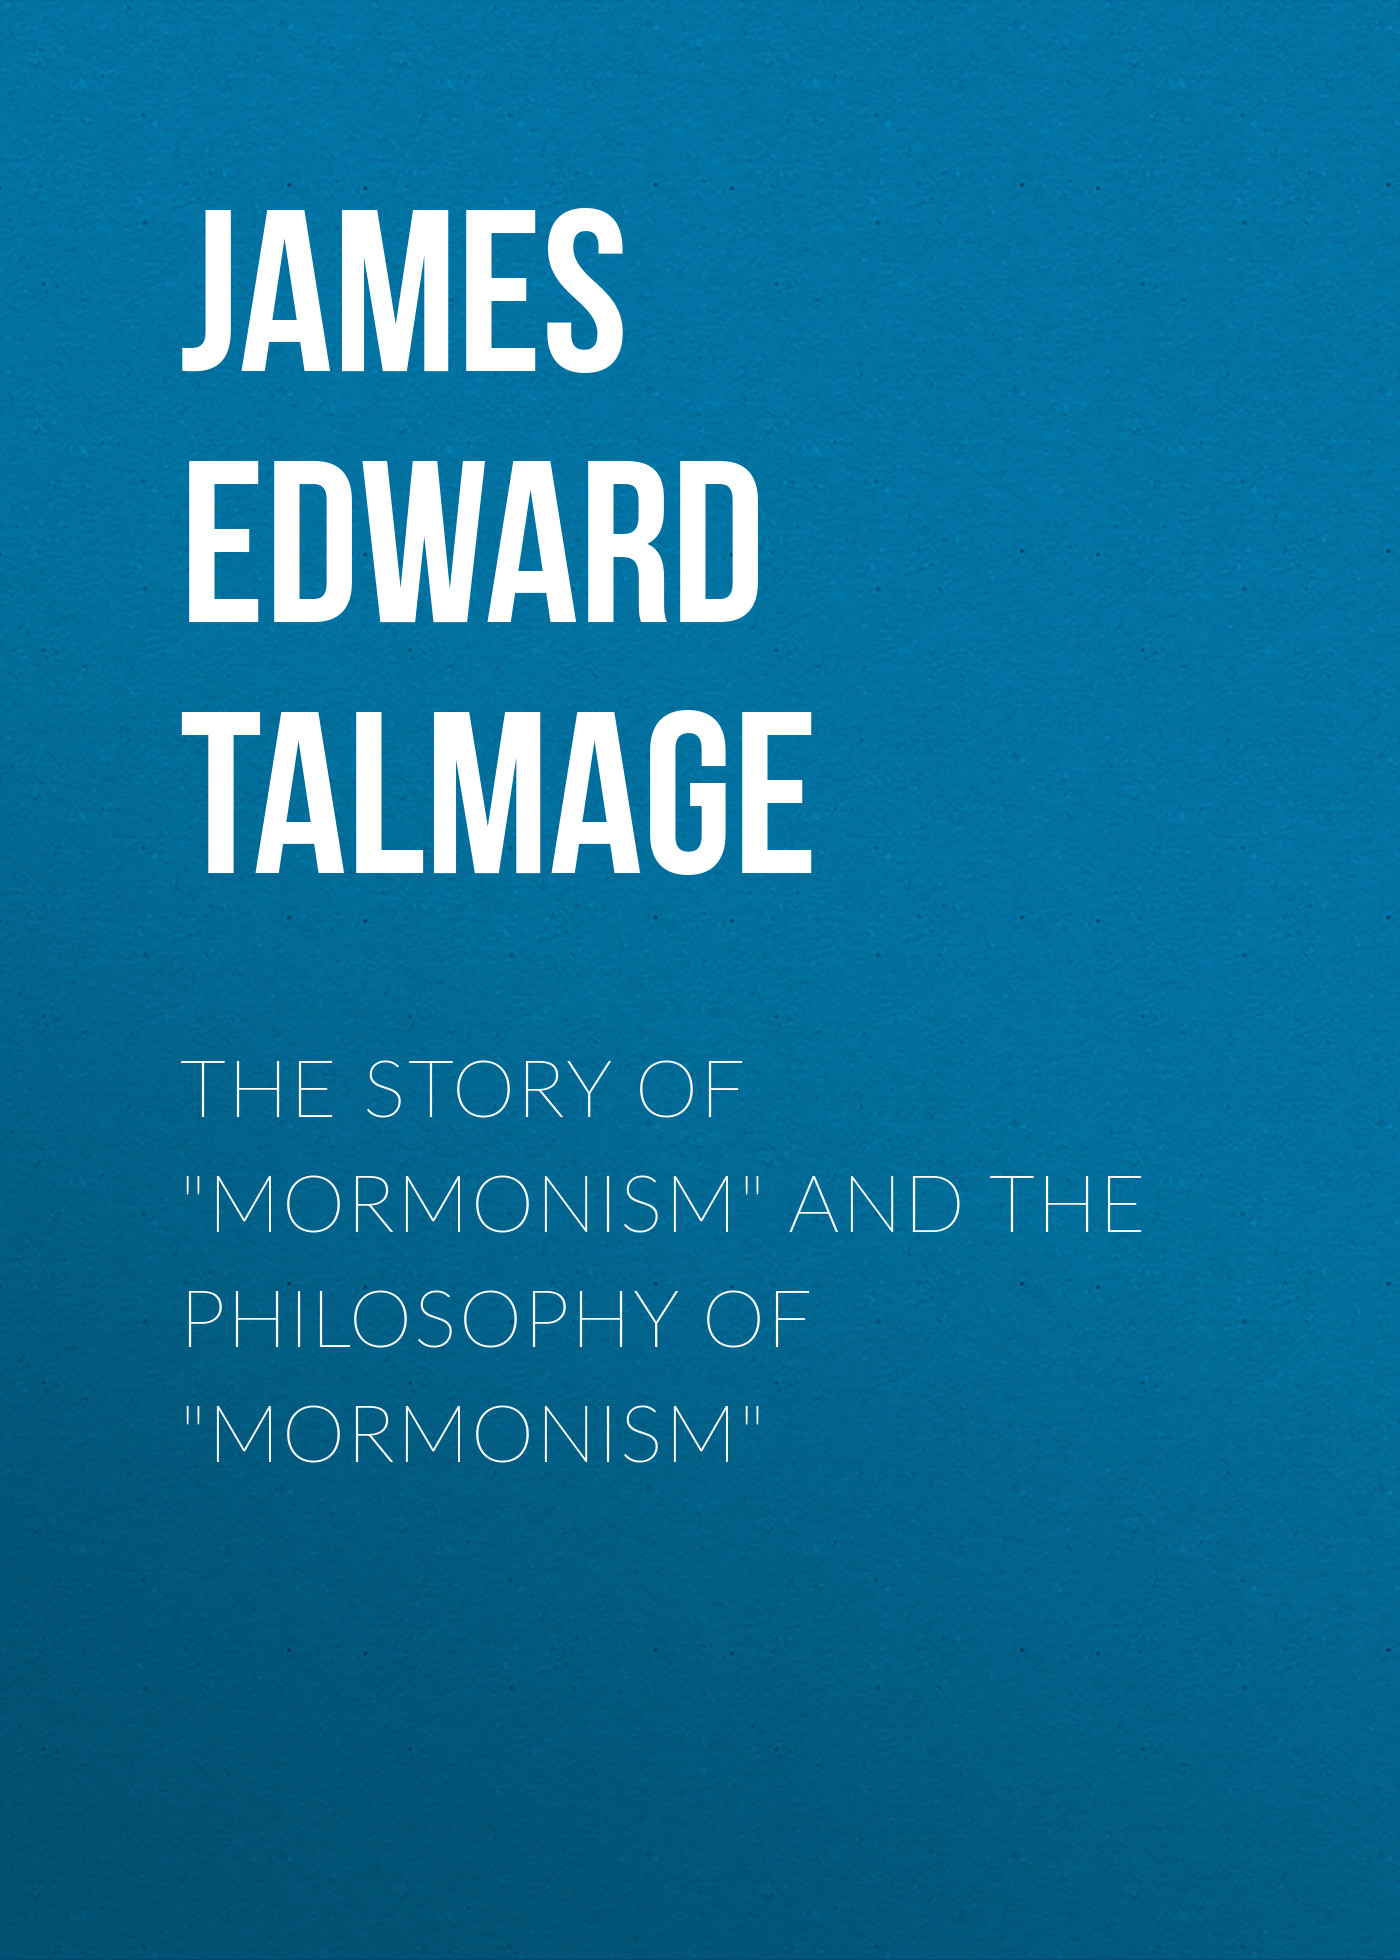 James Edward Talmage The Story of "Mormonism" and The Philosophy of "Mormonism"